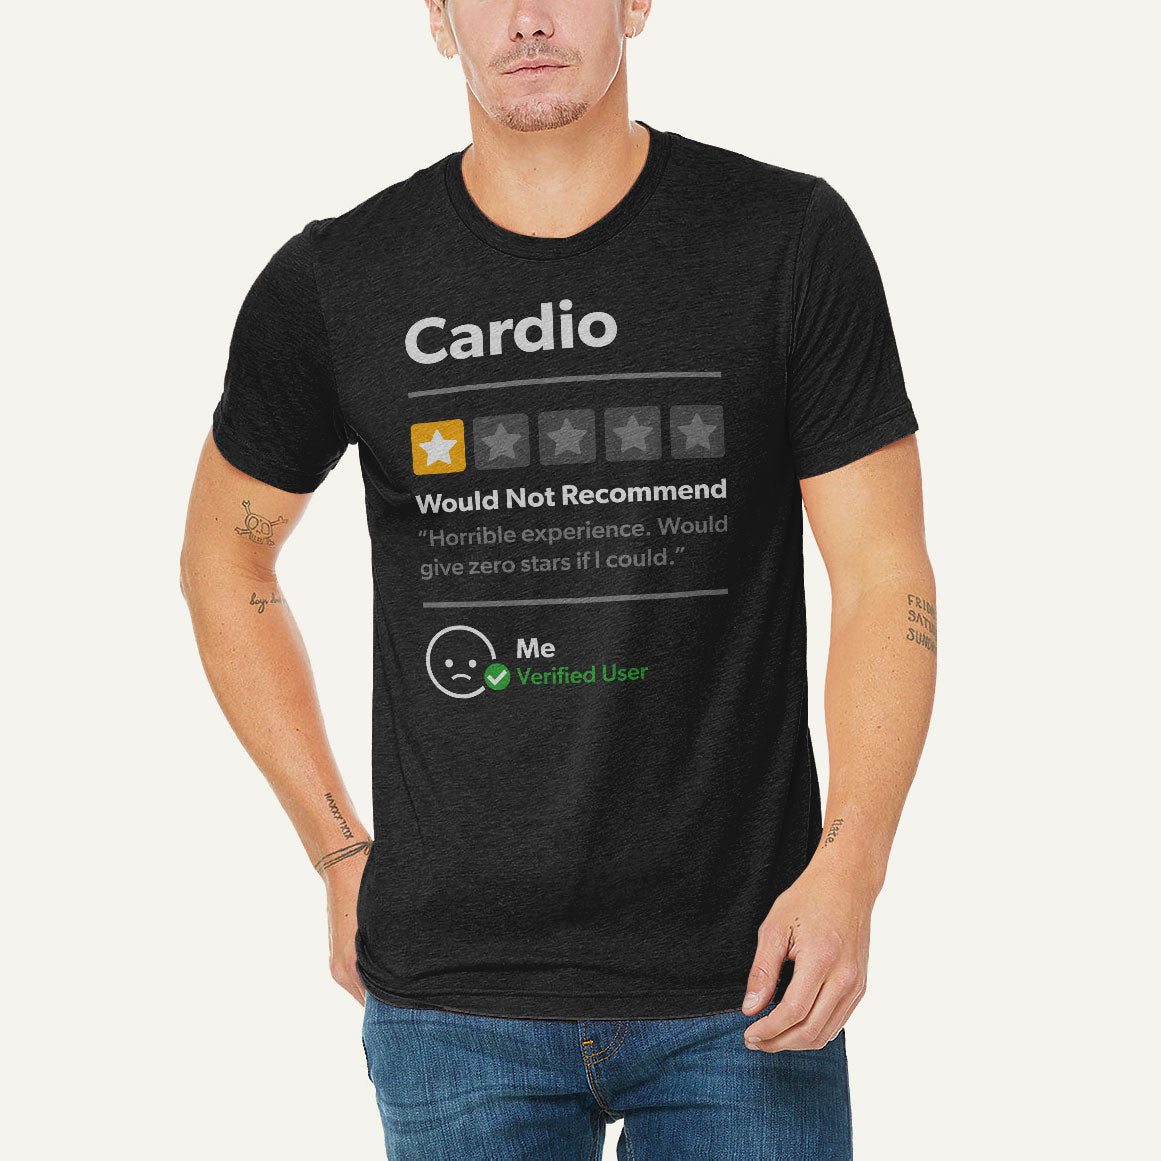 Cardio 1 Star Would Not Recommend Men's Triblend T-Shirt